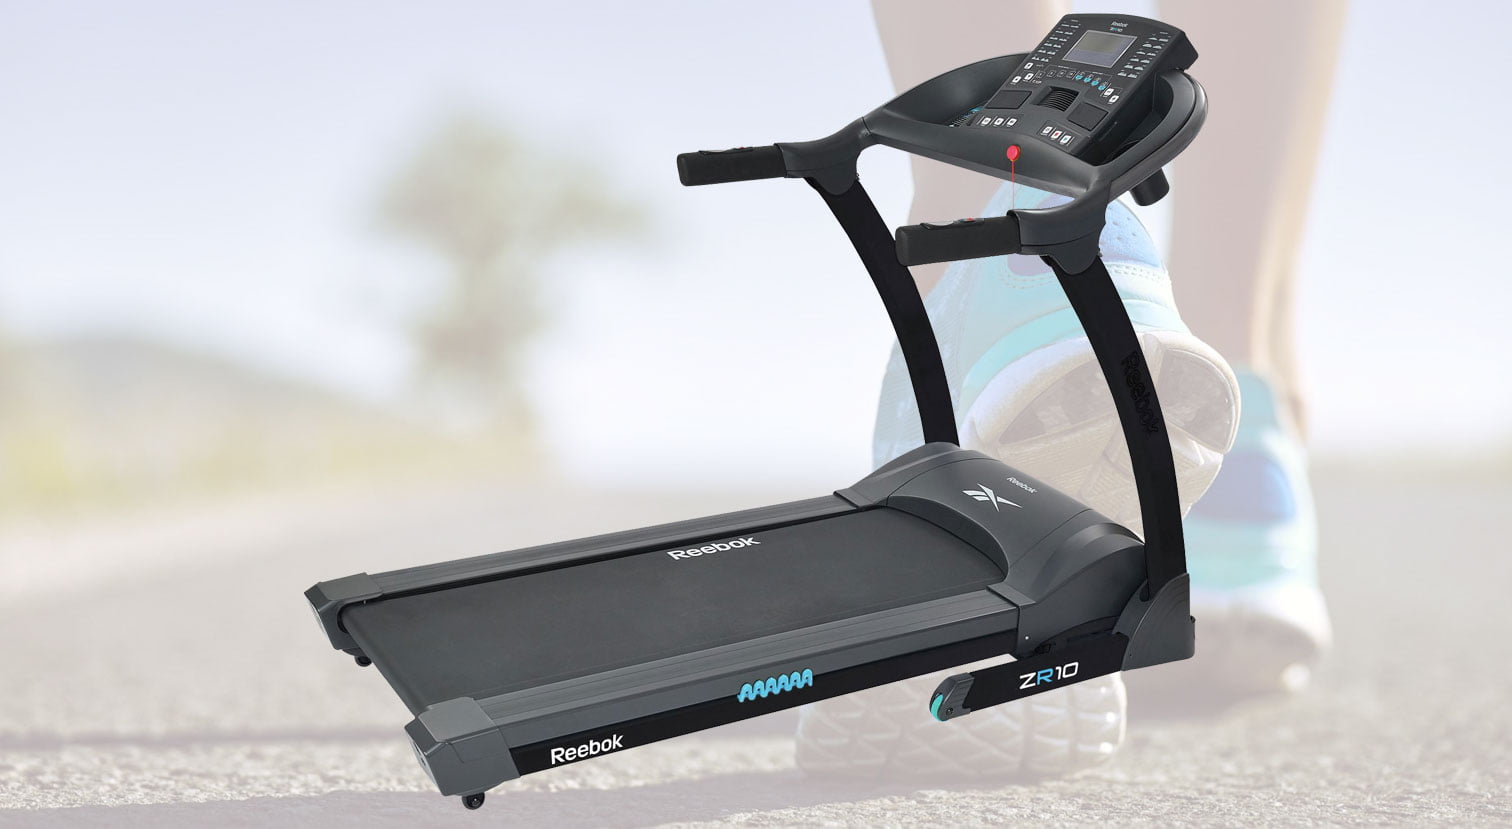 Reebok ZR10 Review - Gym Tech Review - Reviews of the Latest Gym Equipment